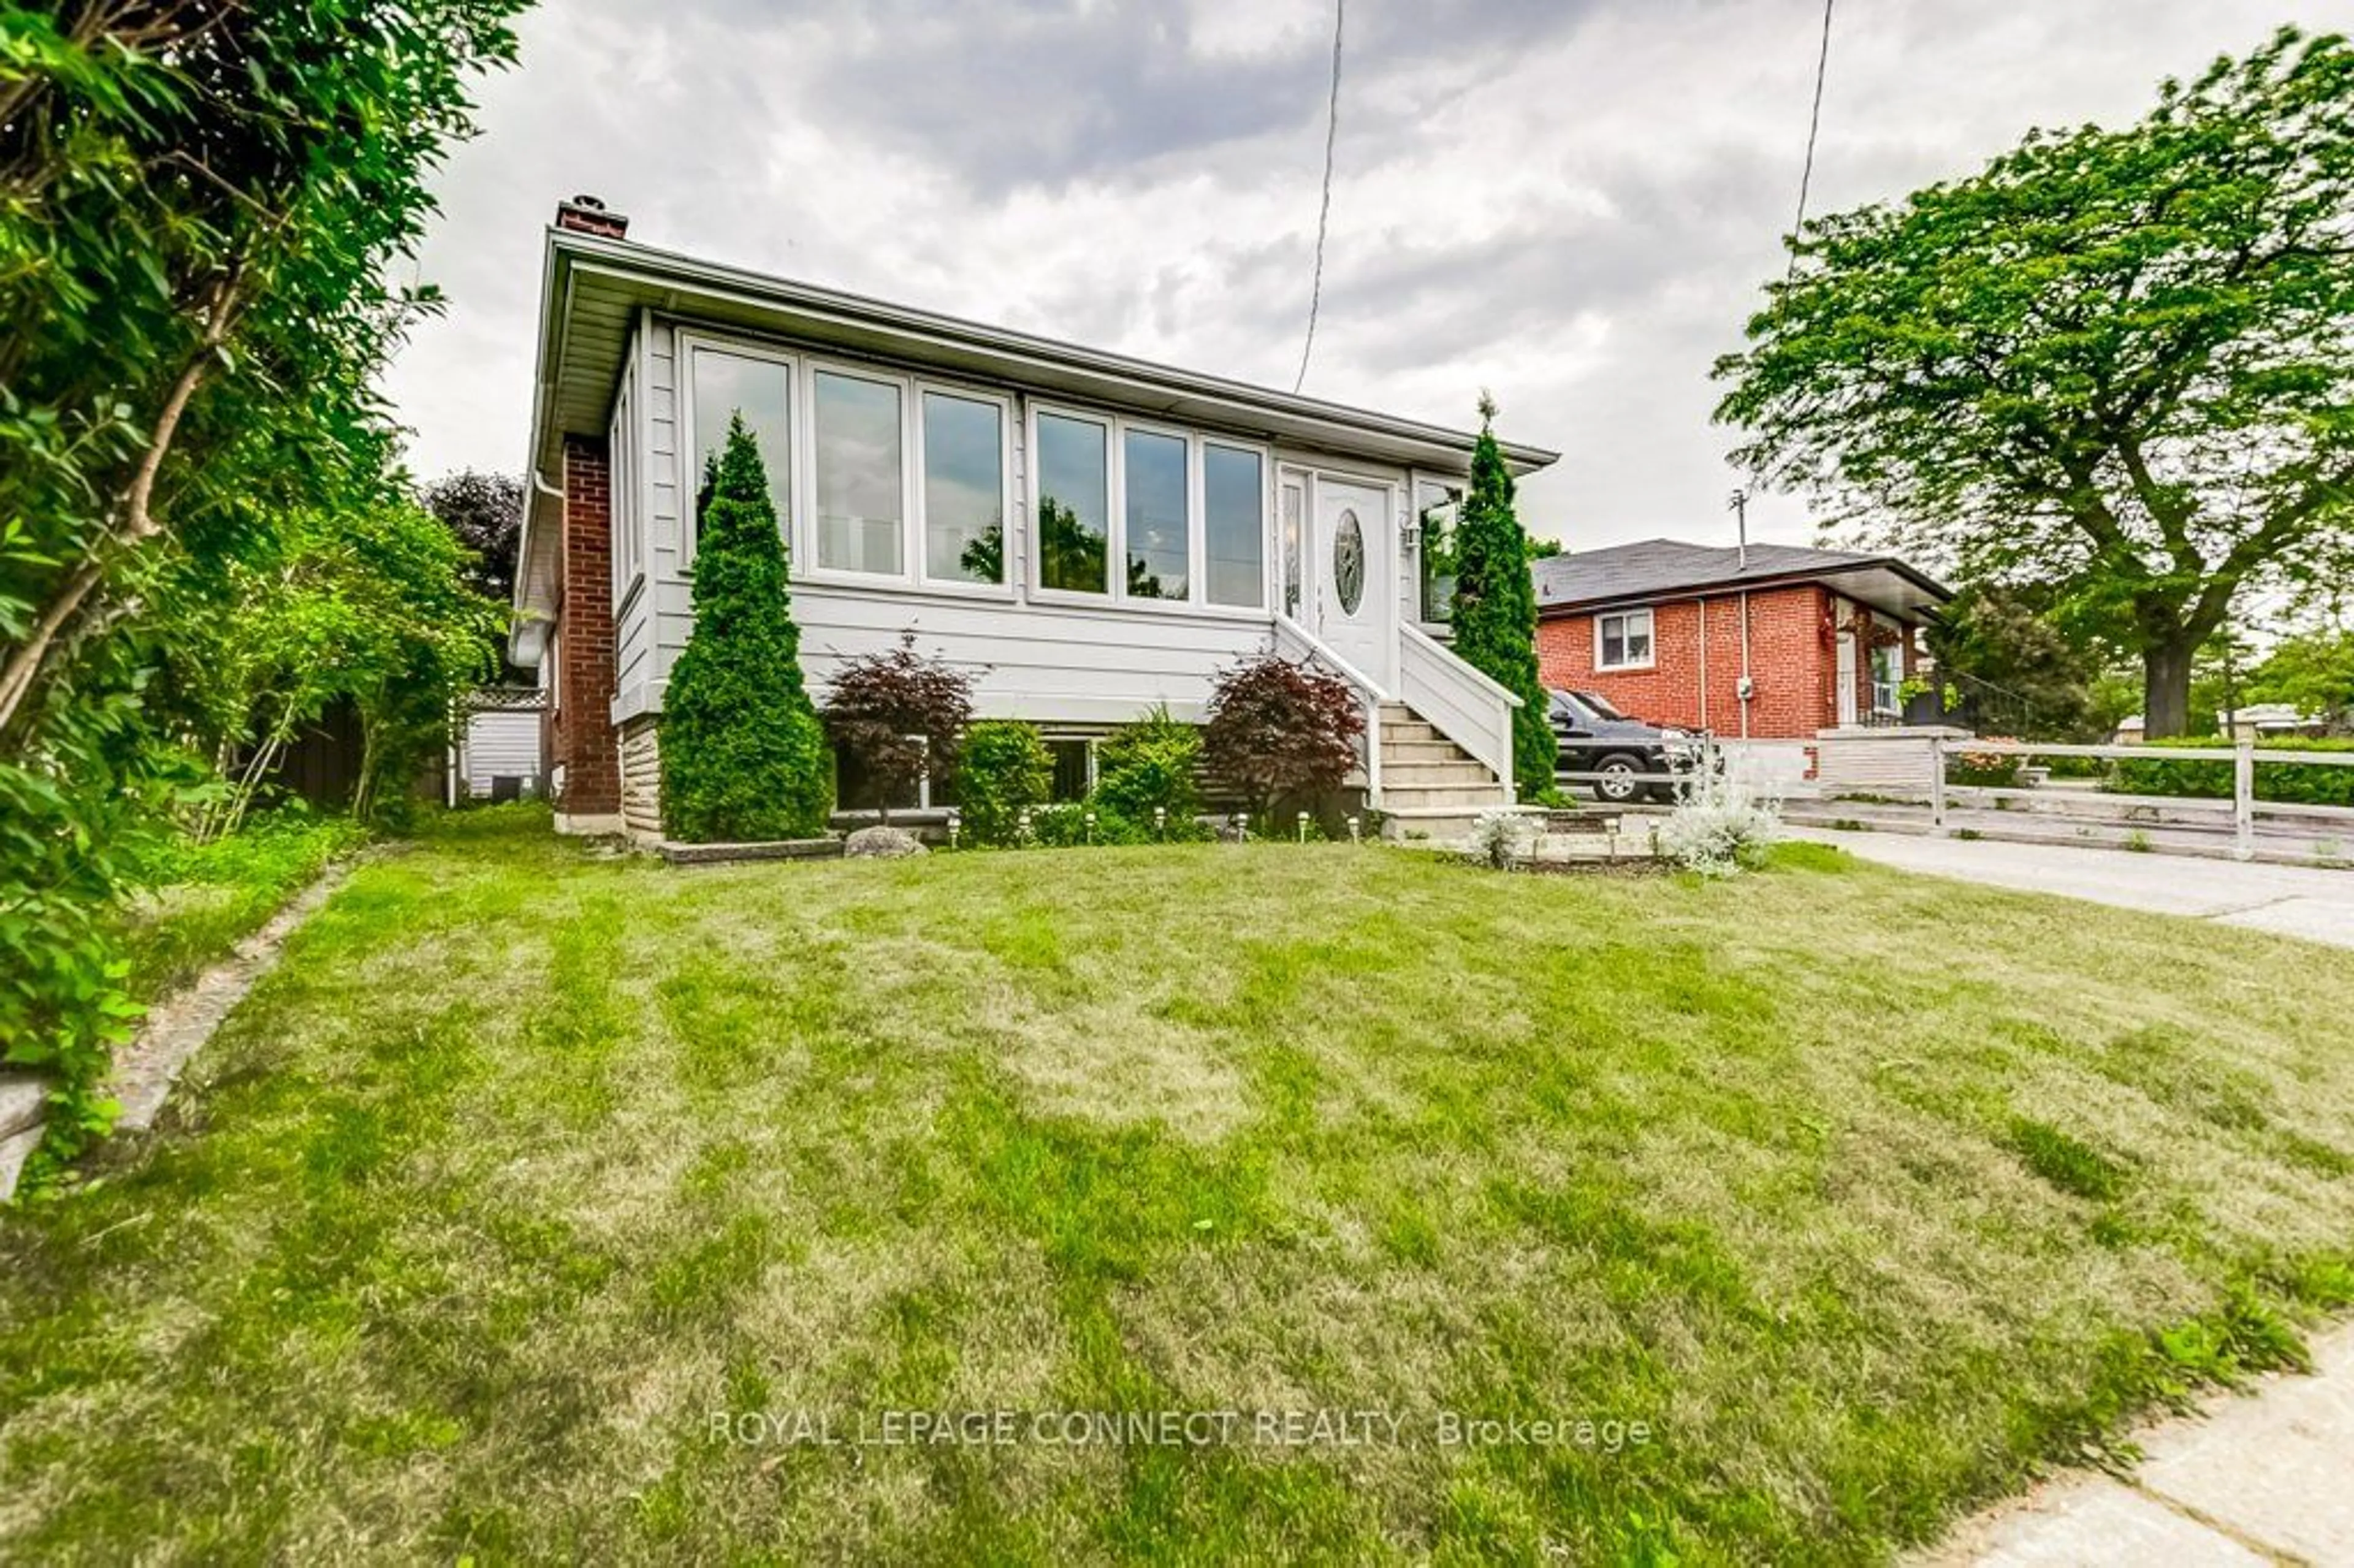 Frontside or backside of a home for 793 Brimorton Dr, Toronto Ontario M1G 2S8